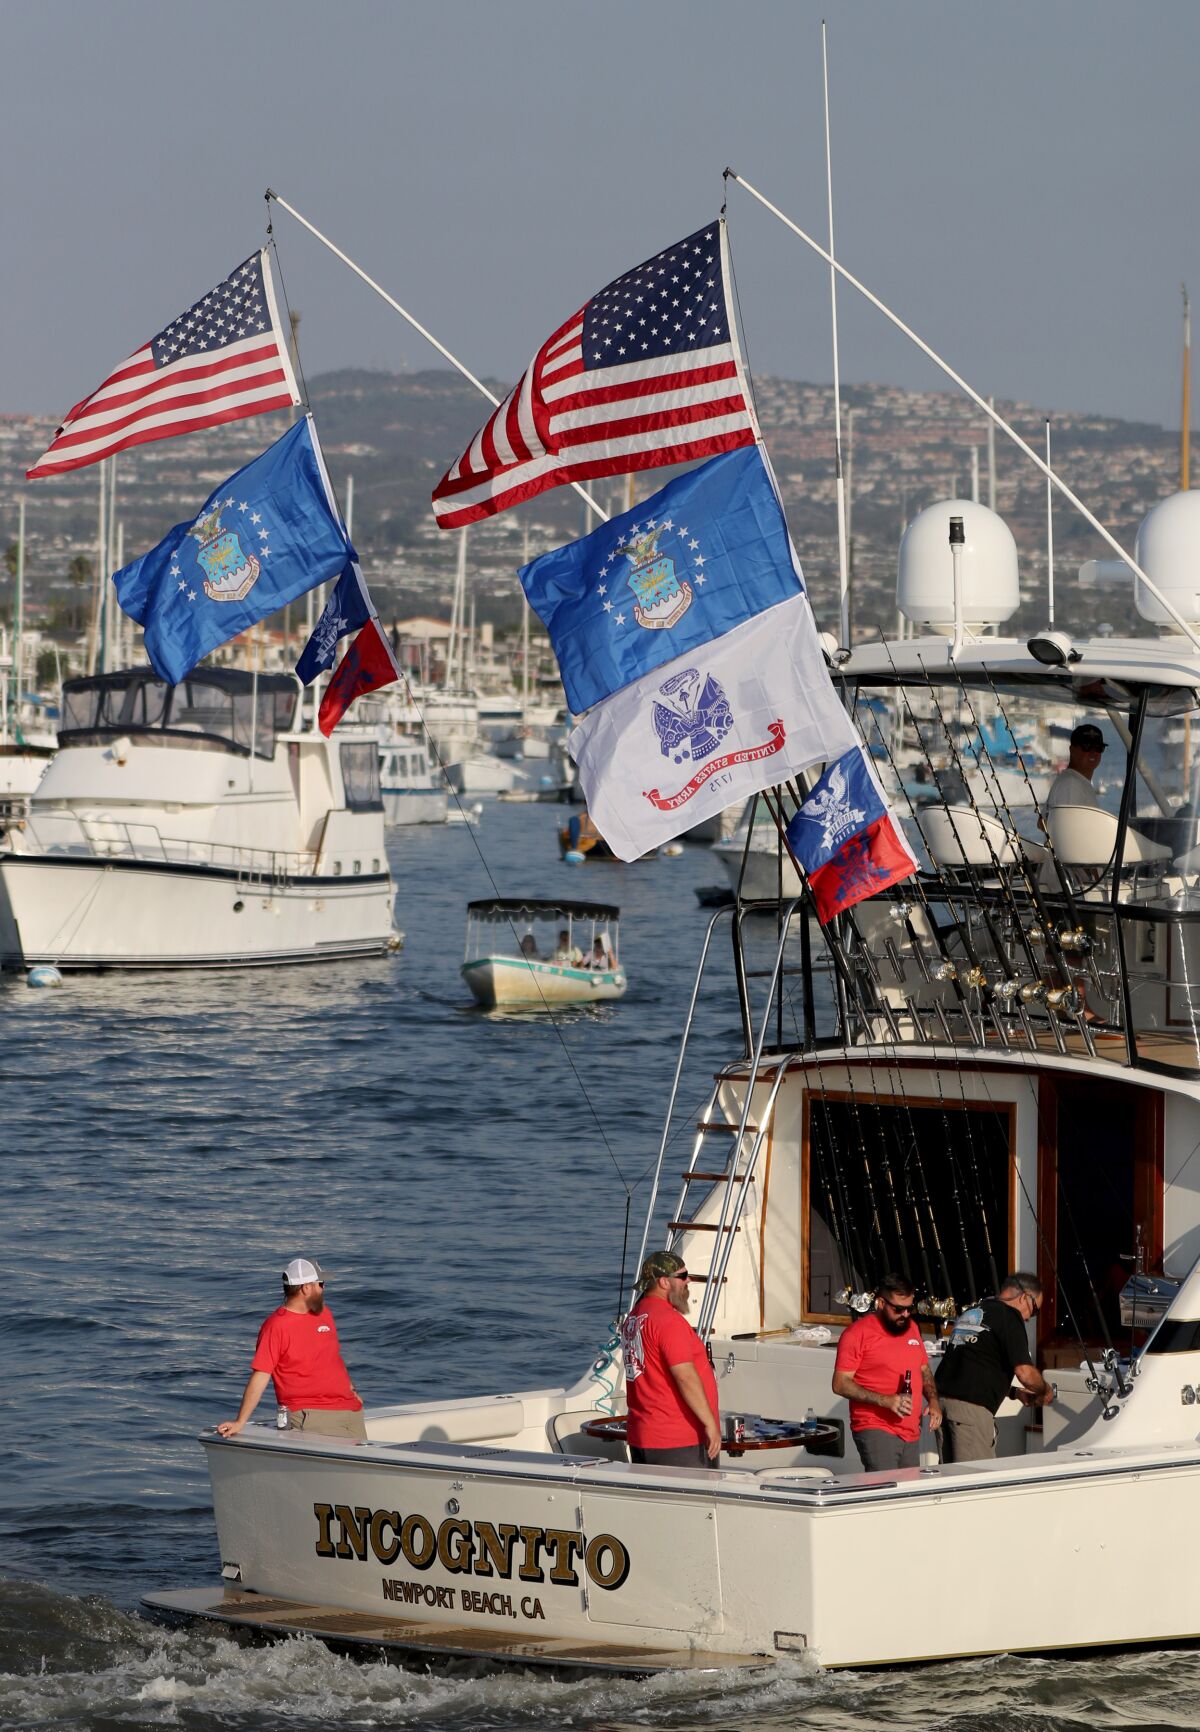 Participating boats are decorated with a variety of flags.